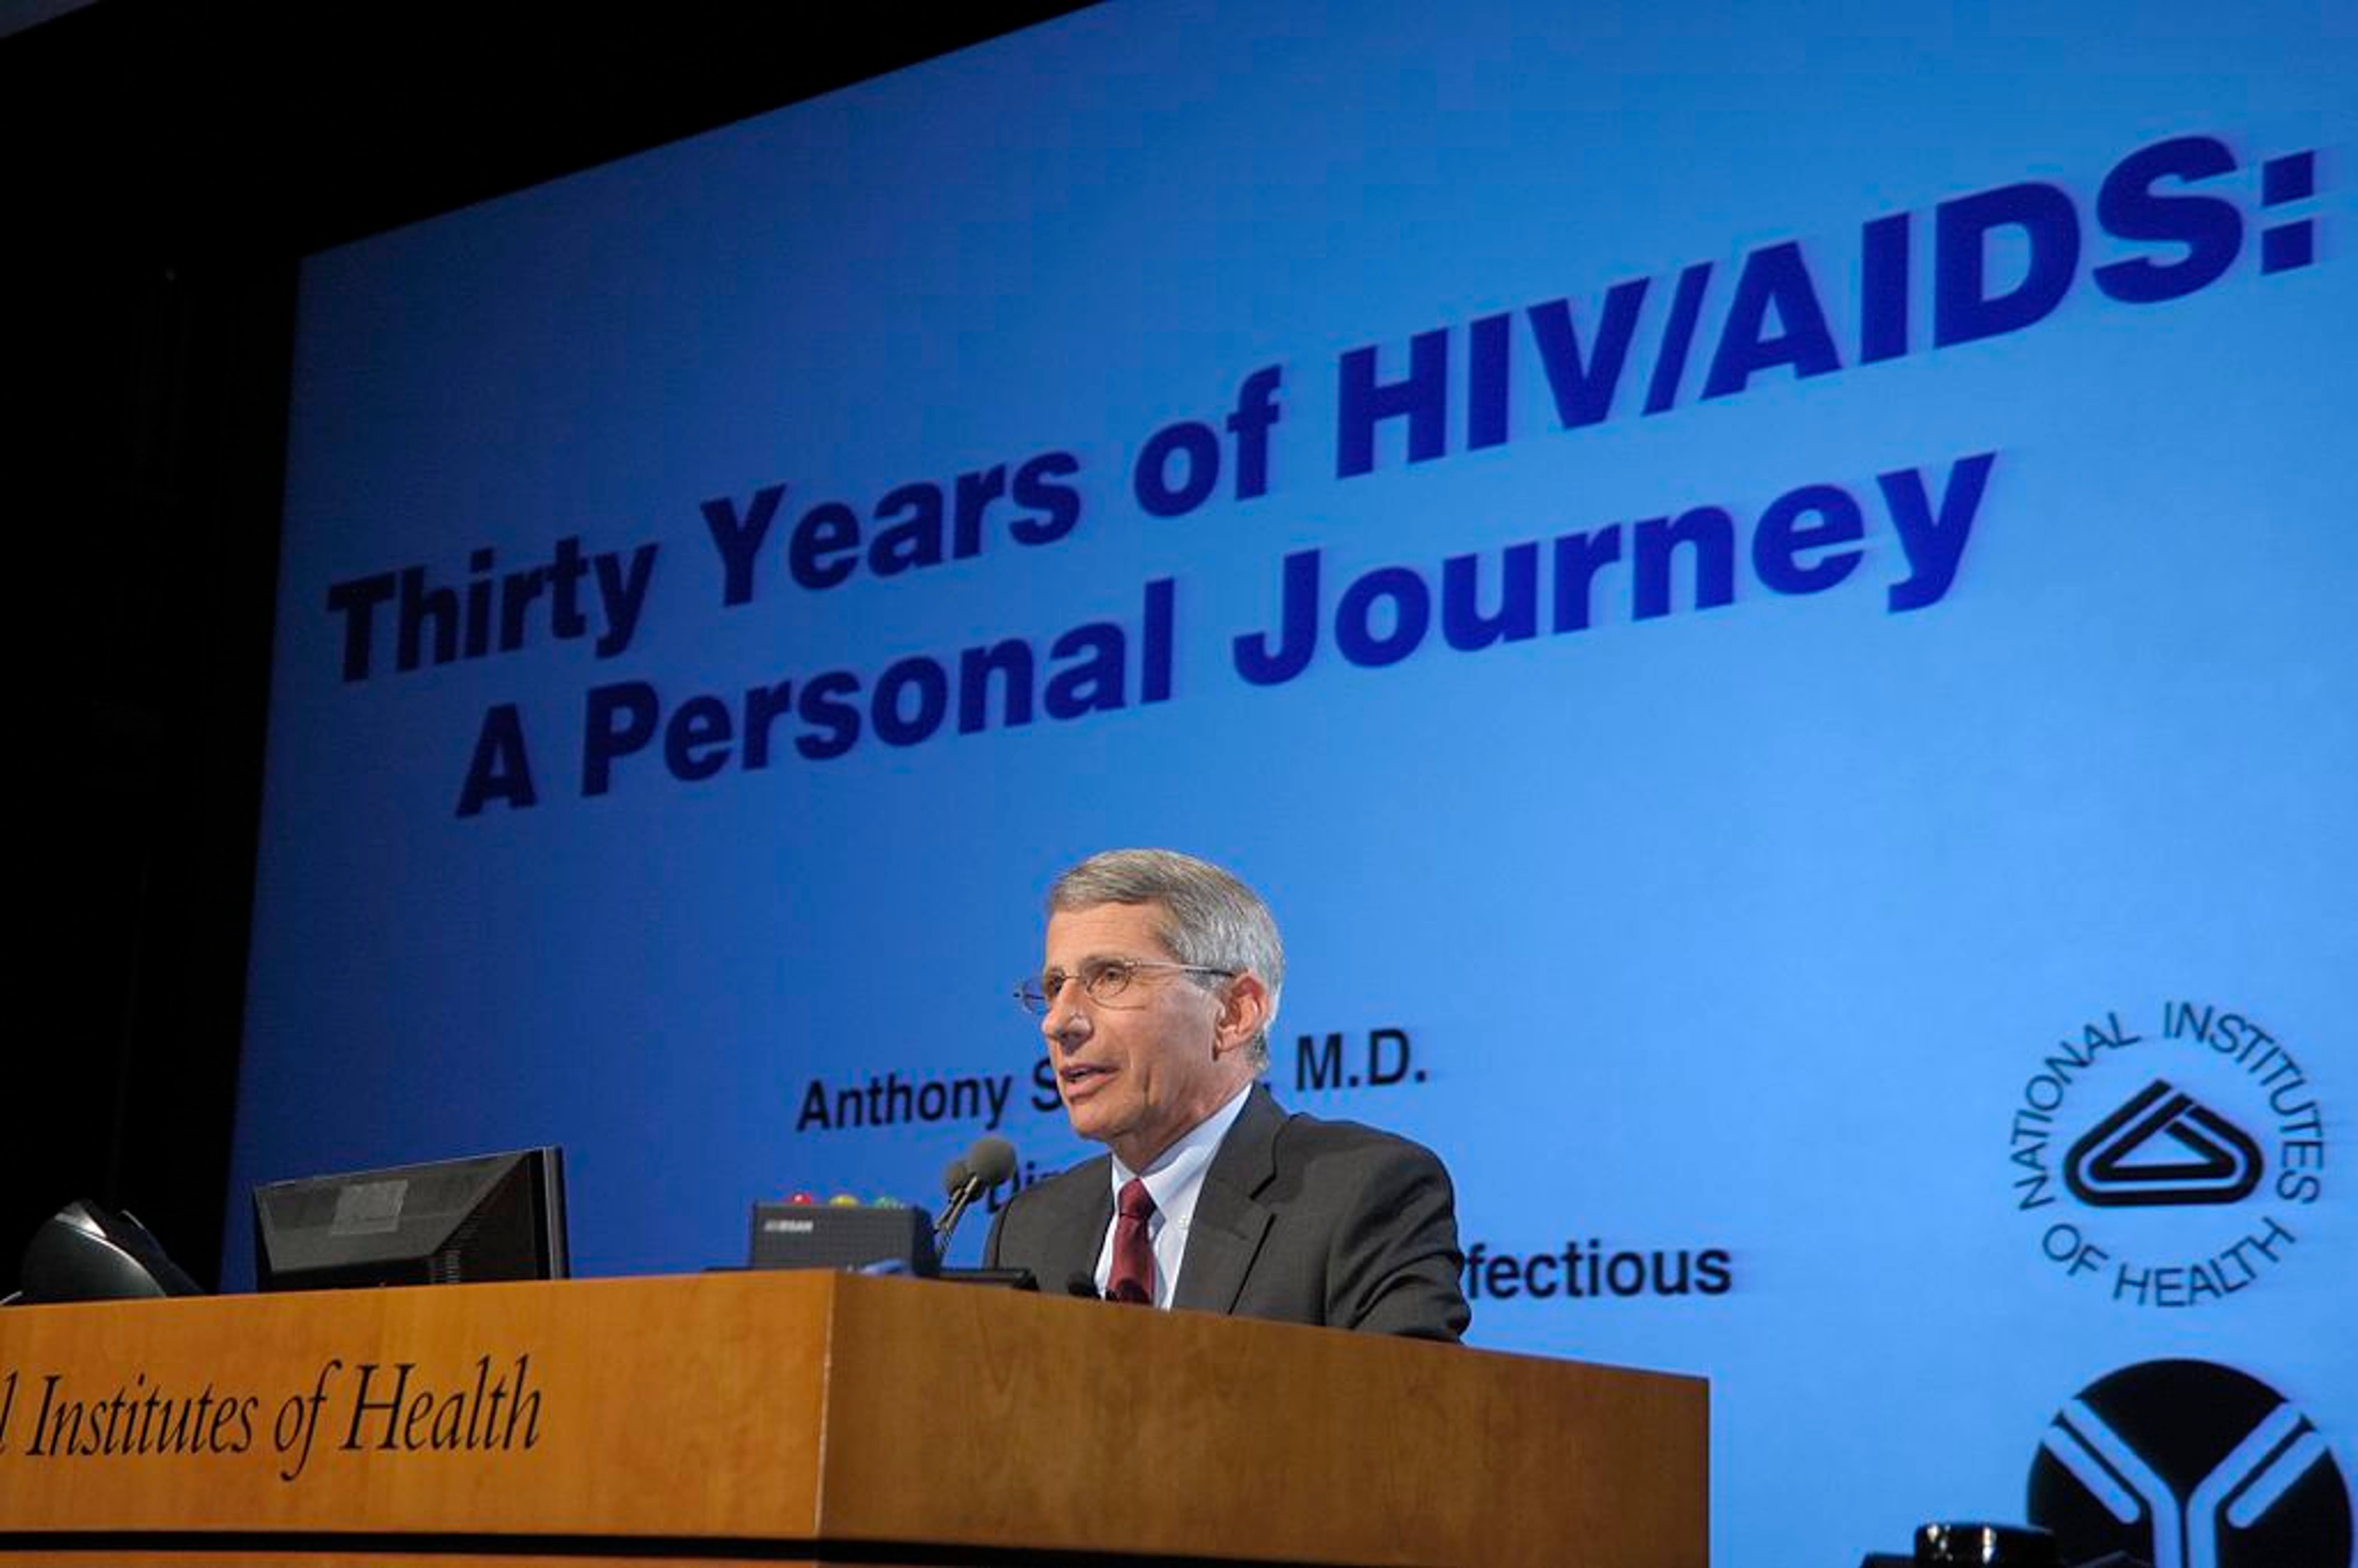 Dr. Anthony Fauci, Face Of US COVID-19 Response, To Retire In December